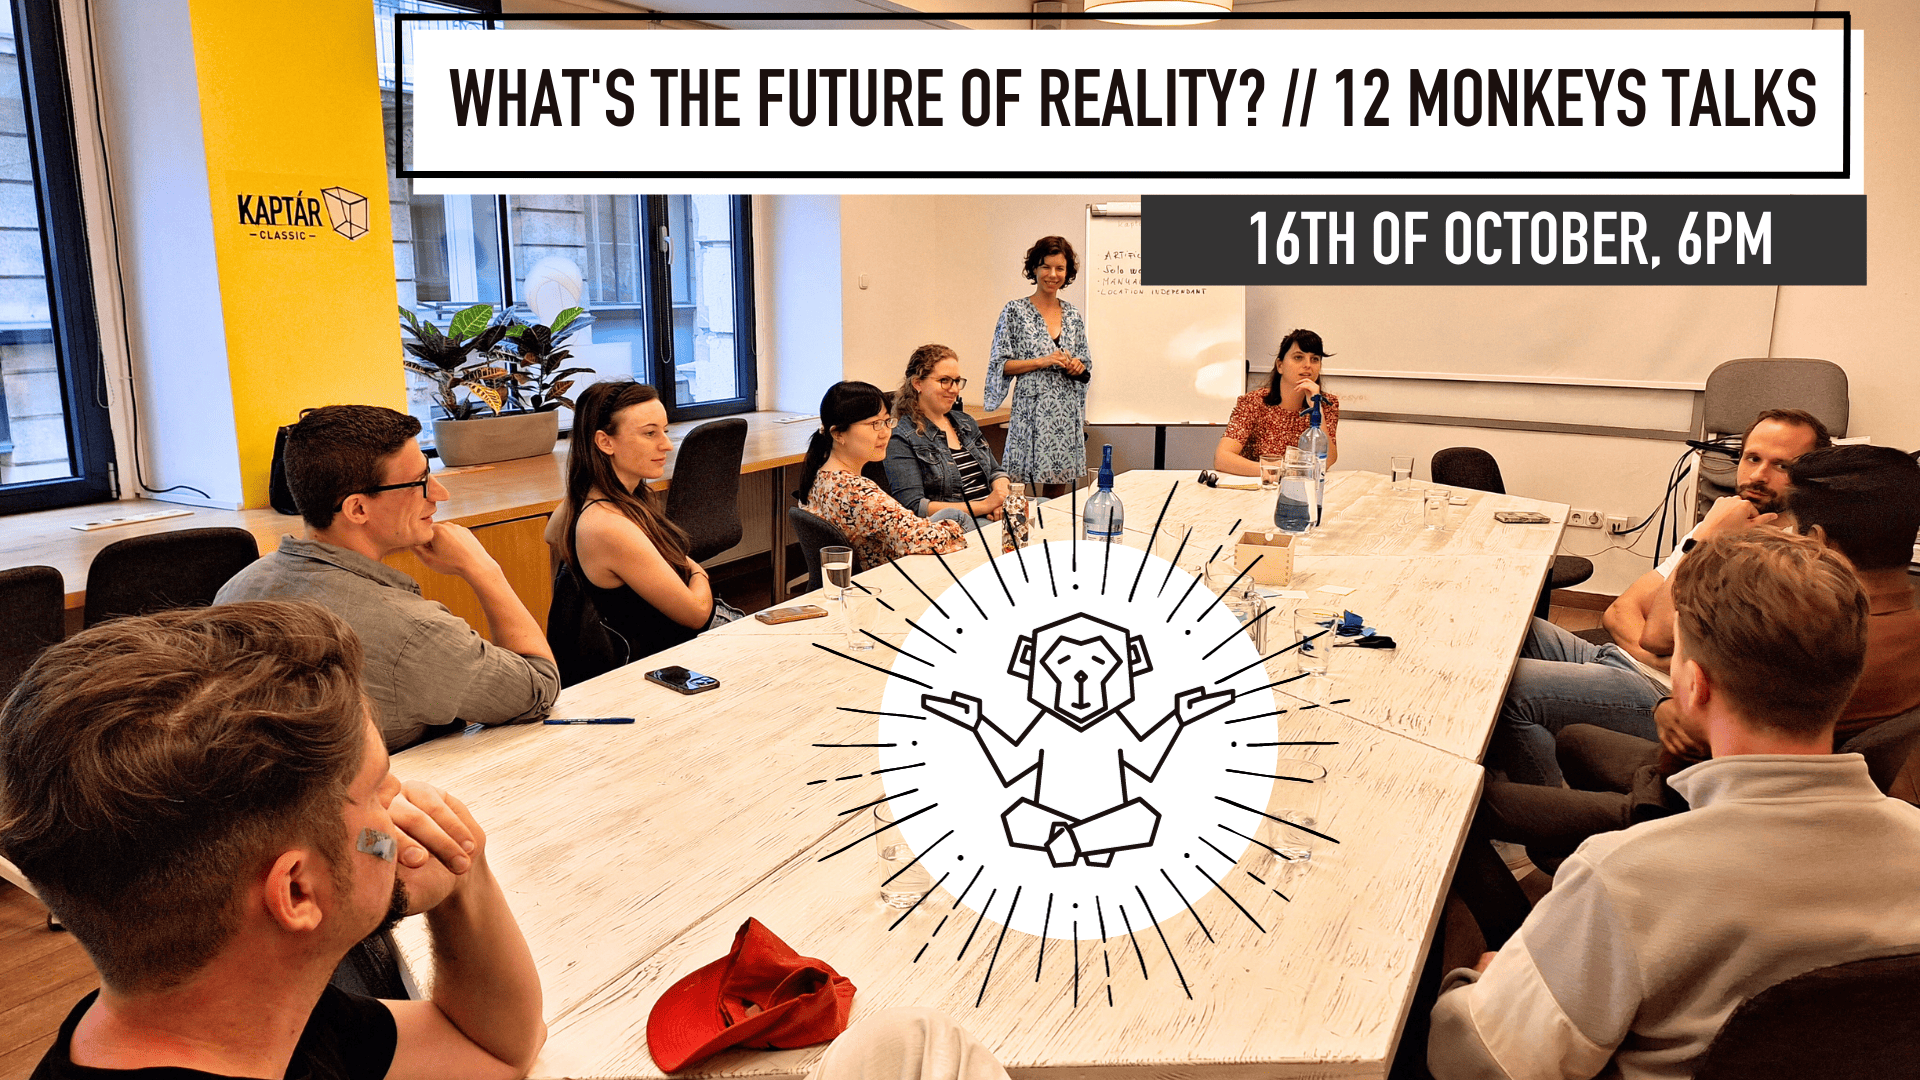 THE FUTURE OF REALITY ?  16 OCT